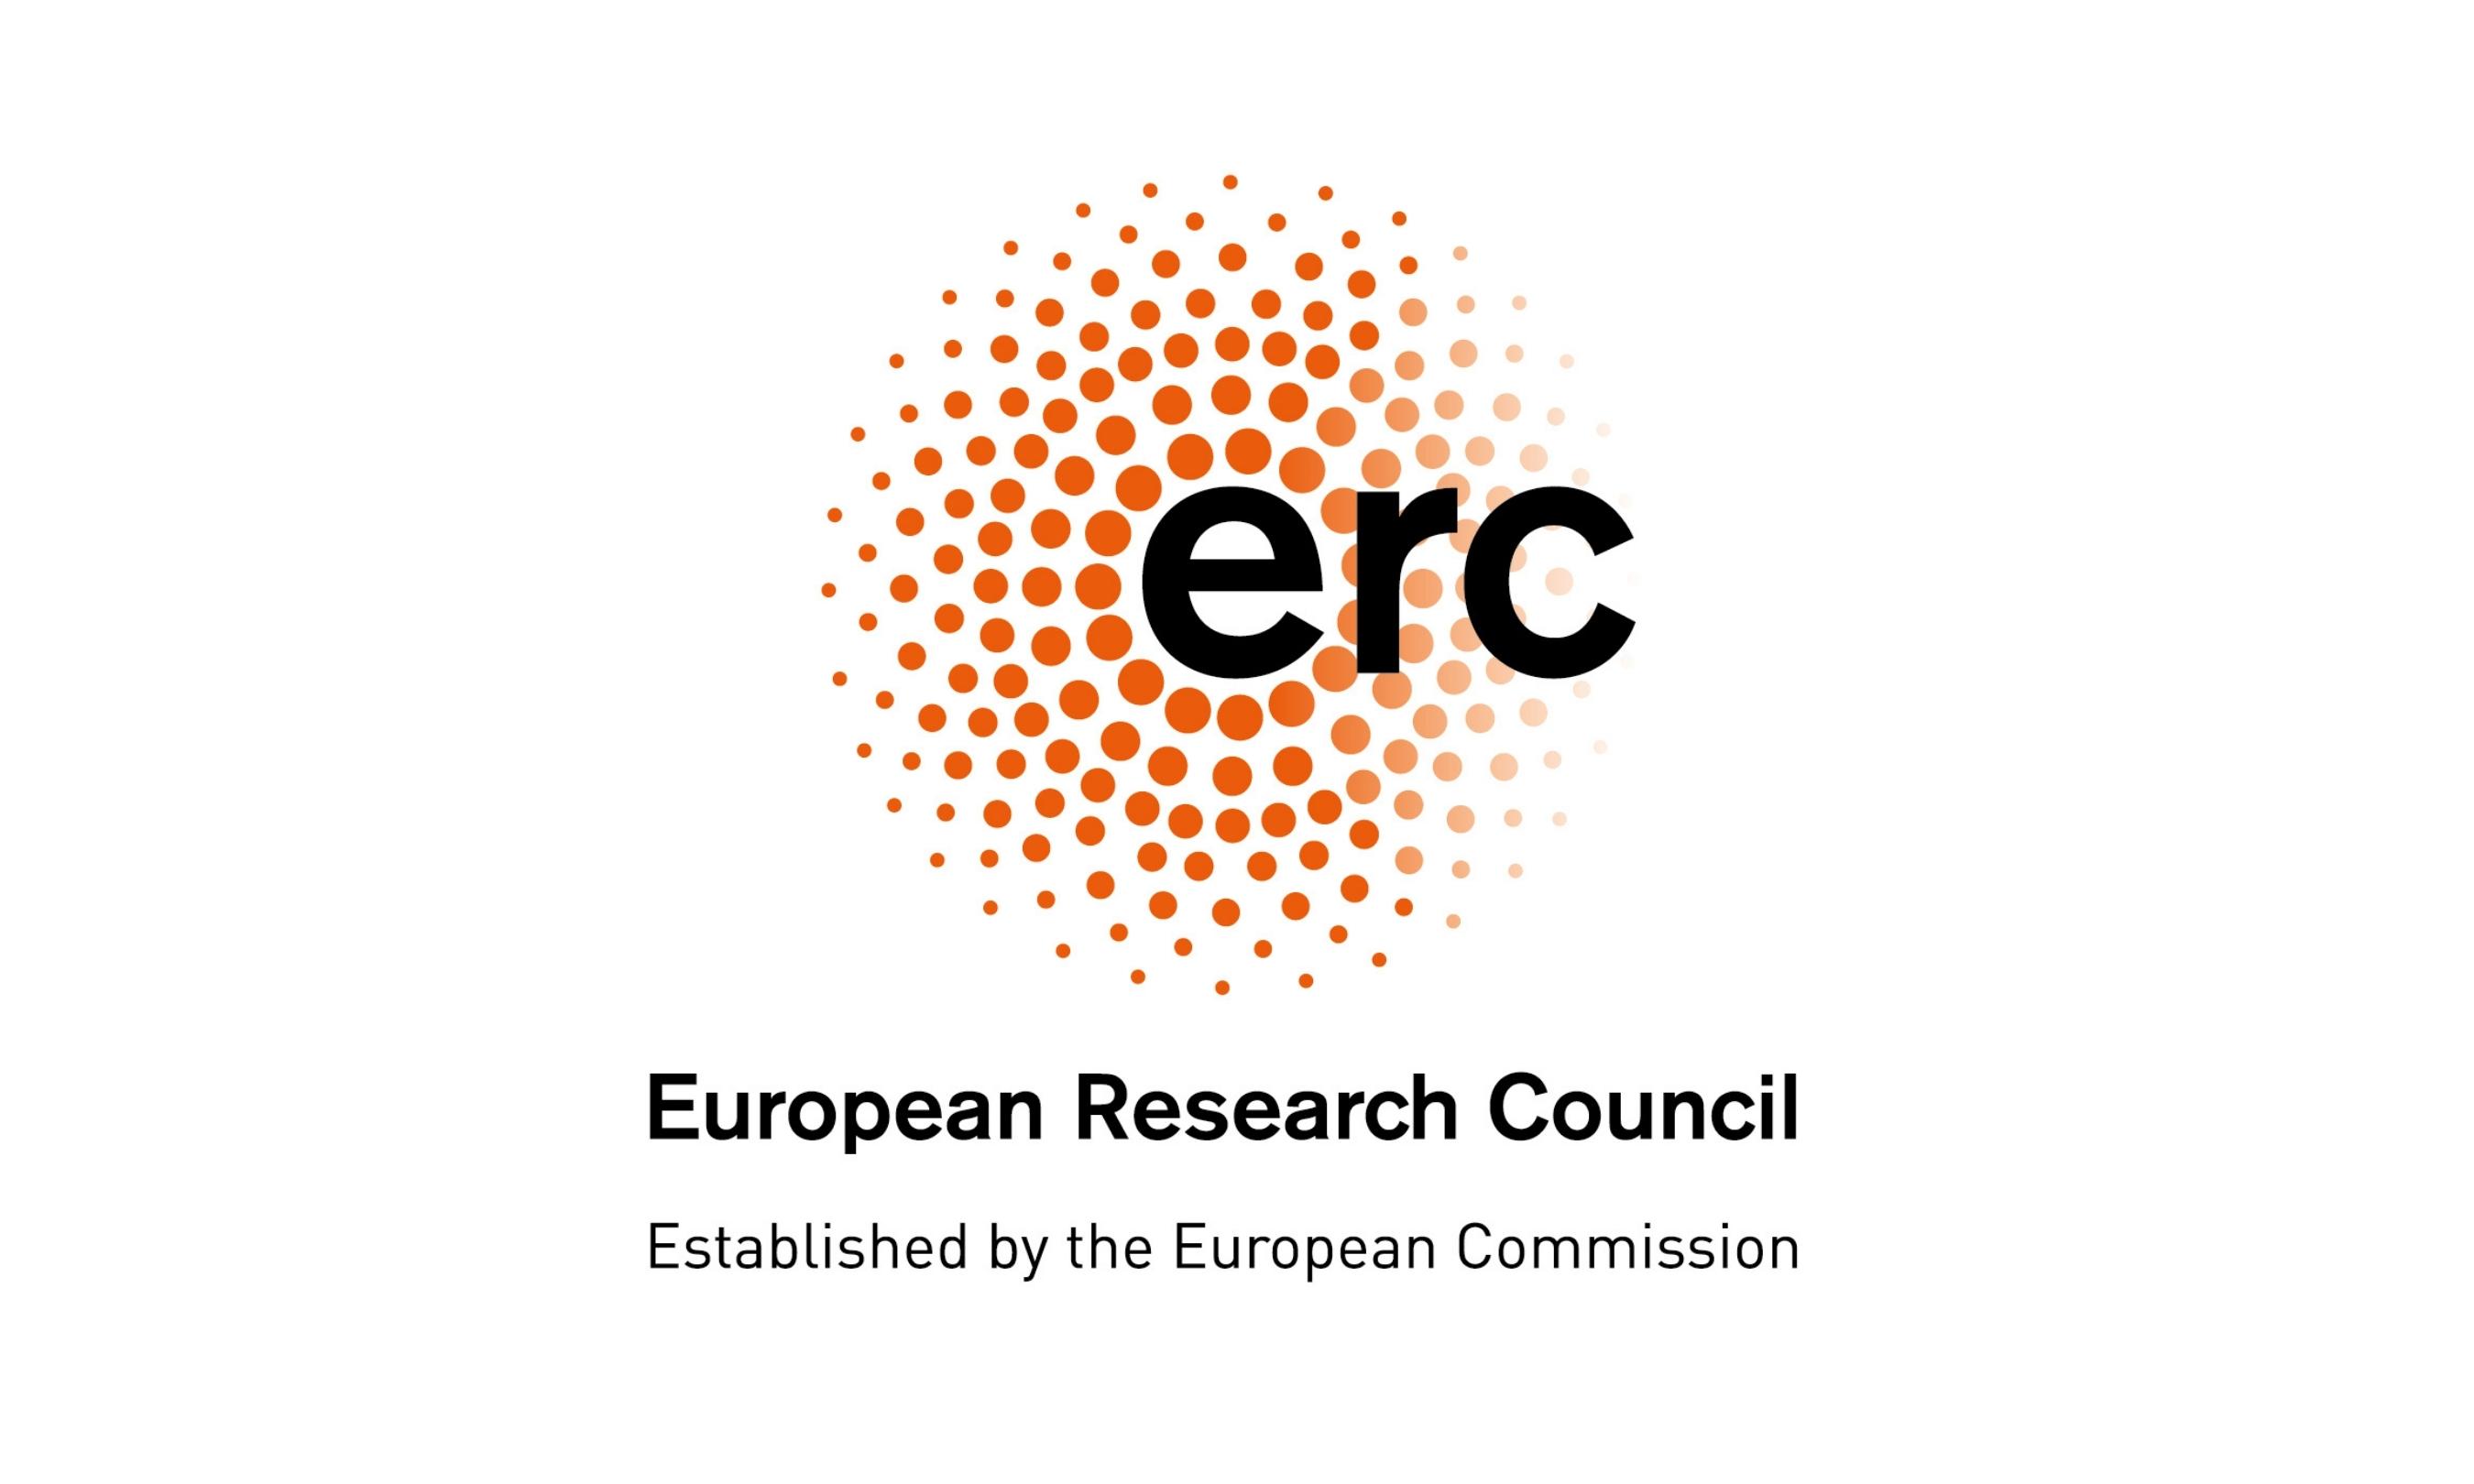 Cover image of Striking impact of ERC projects confirmed: 79% breakthroughs or major advances